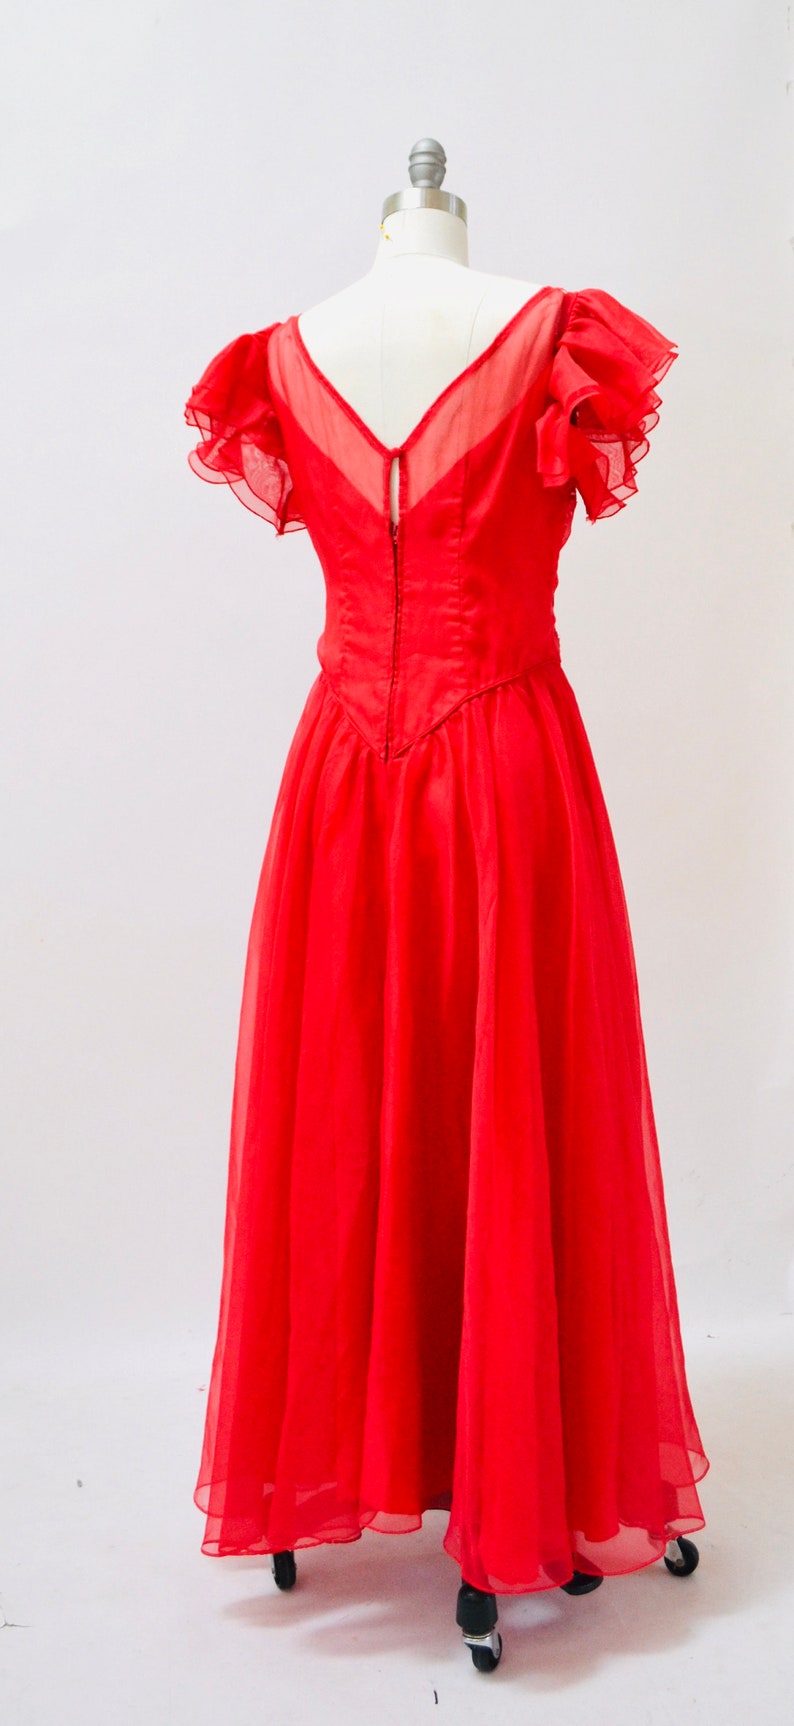 Vintage 70s Prom Dress Size Small Medium Red embroidered Ruffle Dress// 70s 80s Bridesmaid Dress Red Boho Prairie Southern Bell Dress image 7